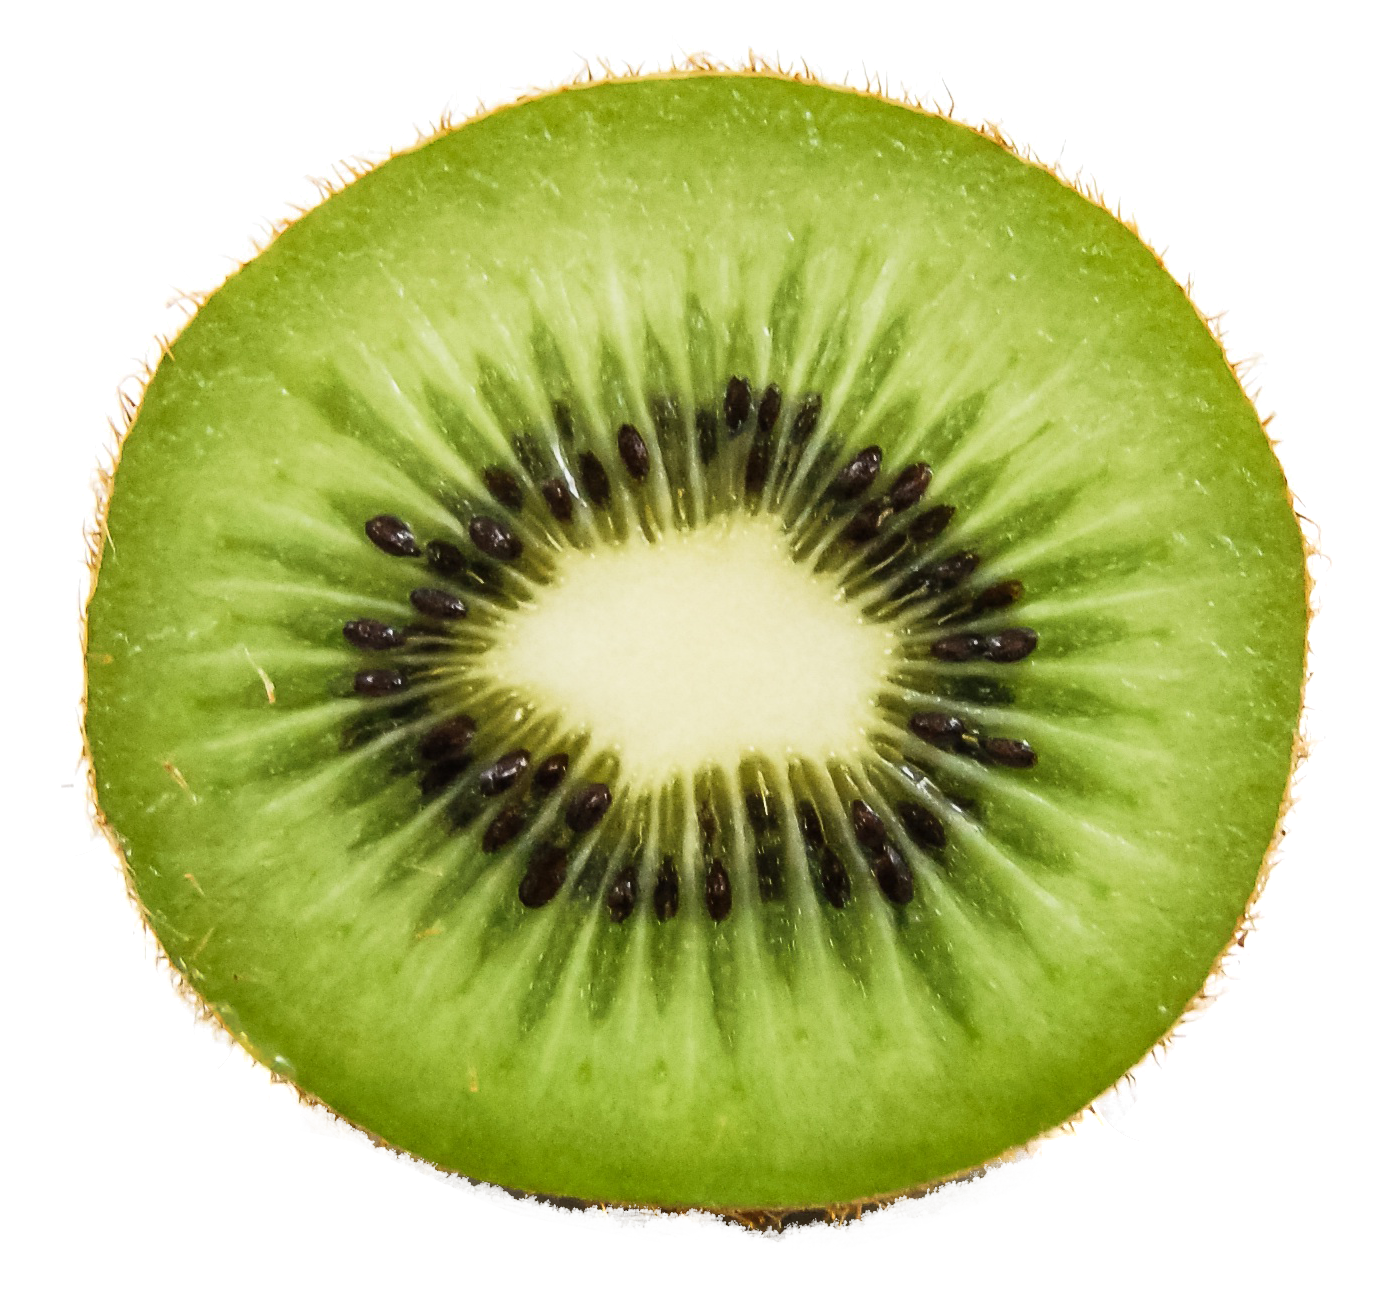 Green cutted kiwi PNG image